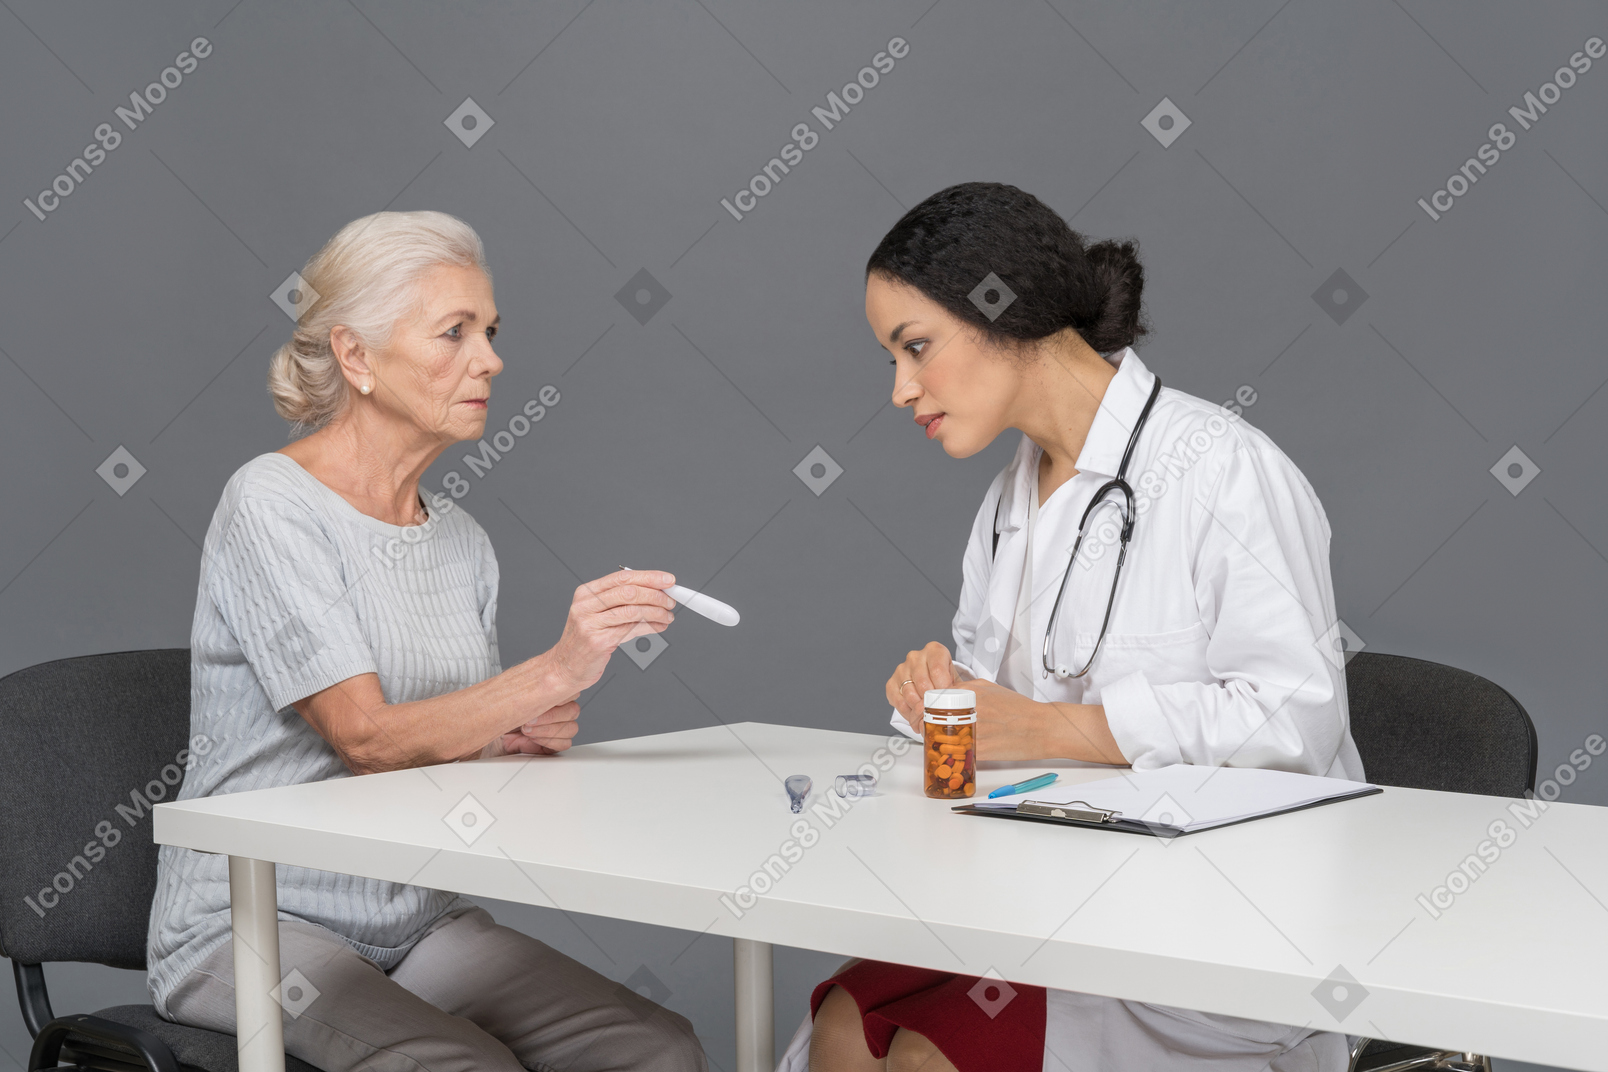 Elder woman showing thermometer to doctor